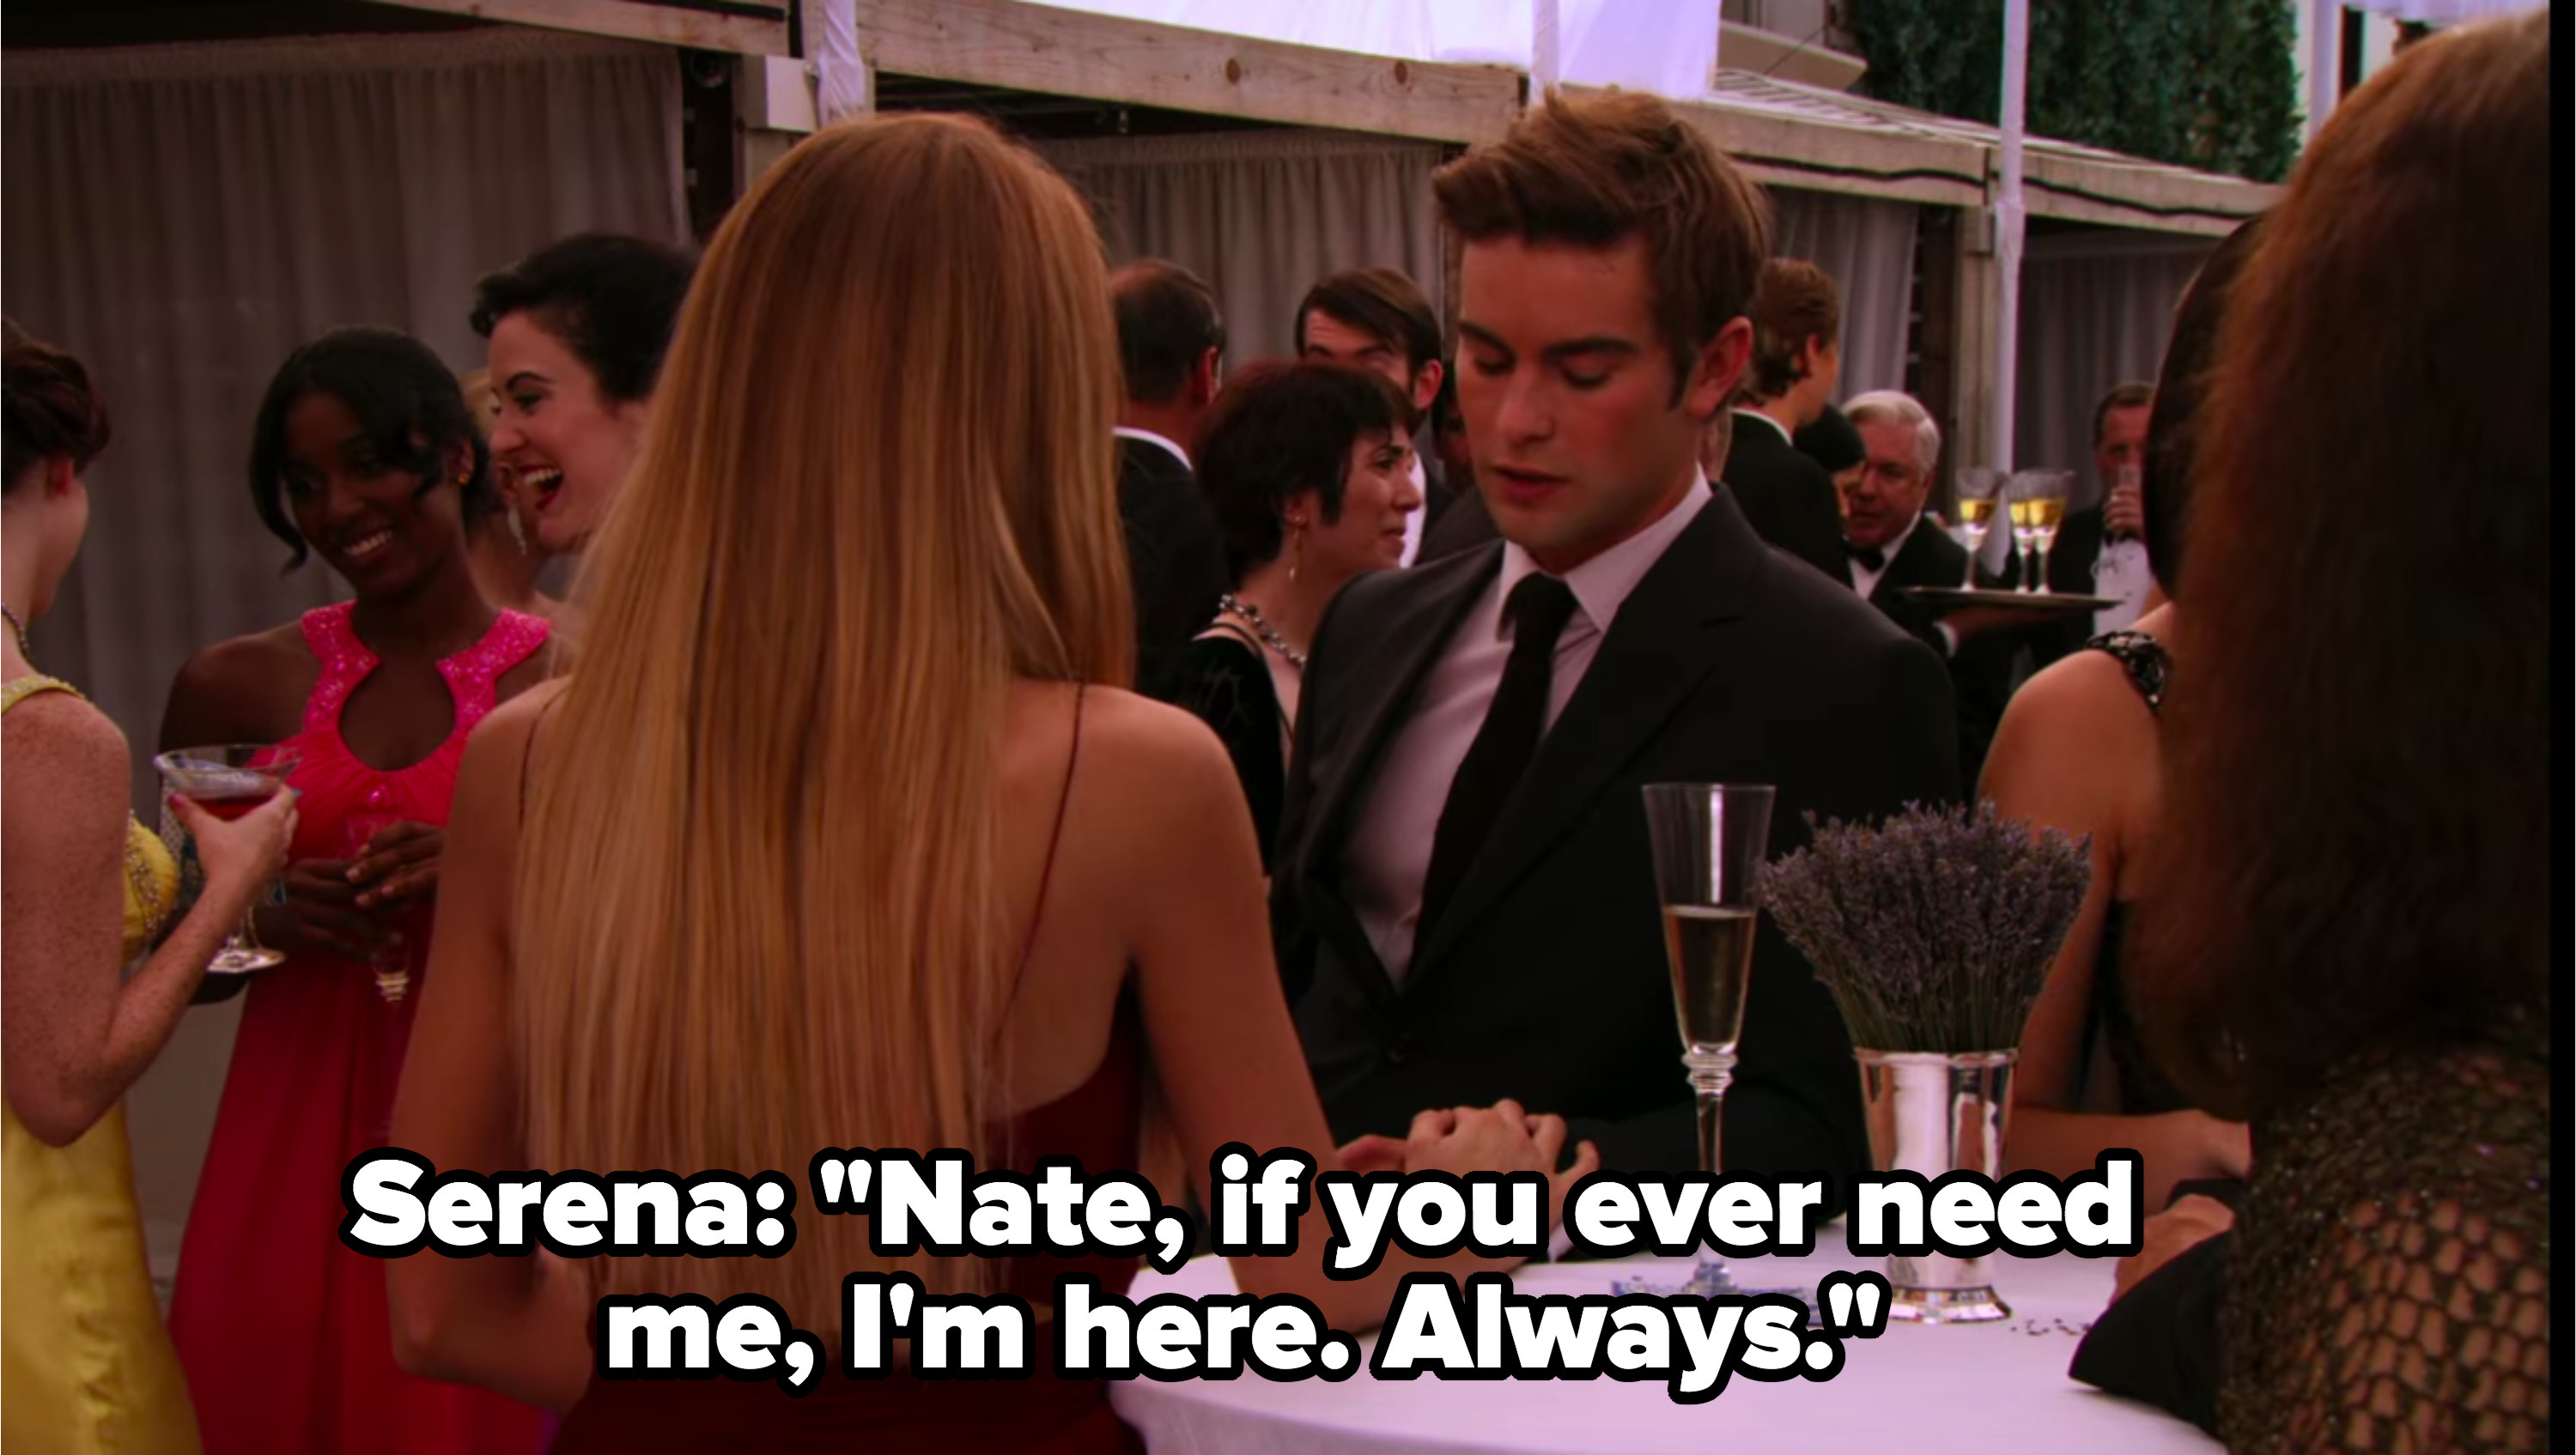 Serena: &quot;Nate if you ever need me I&#x27;m here always&quot;